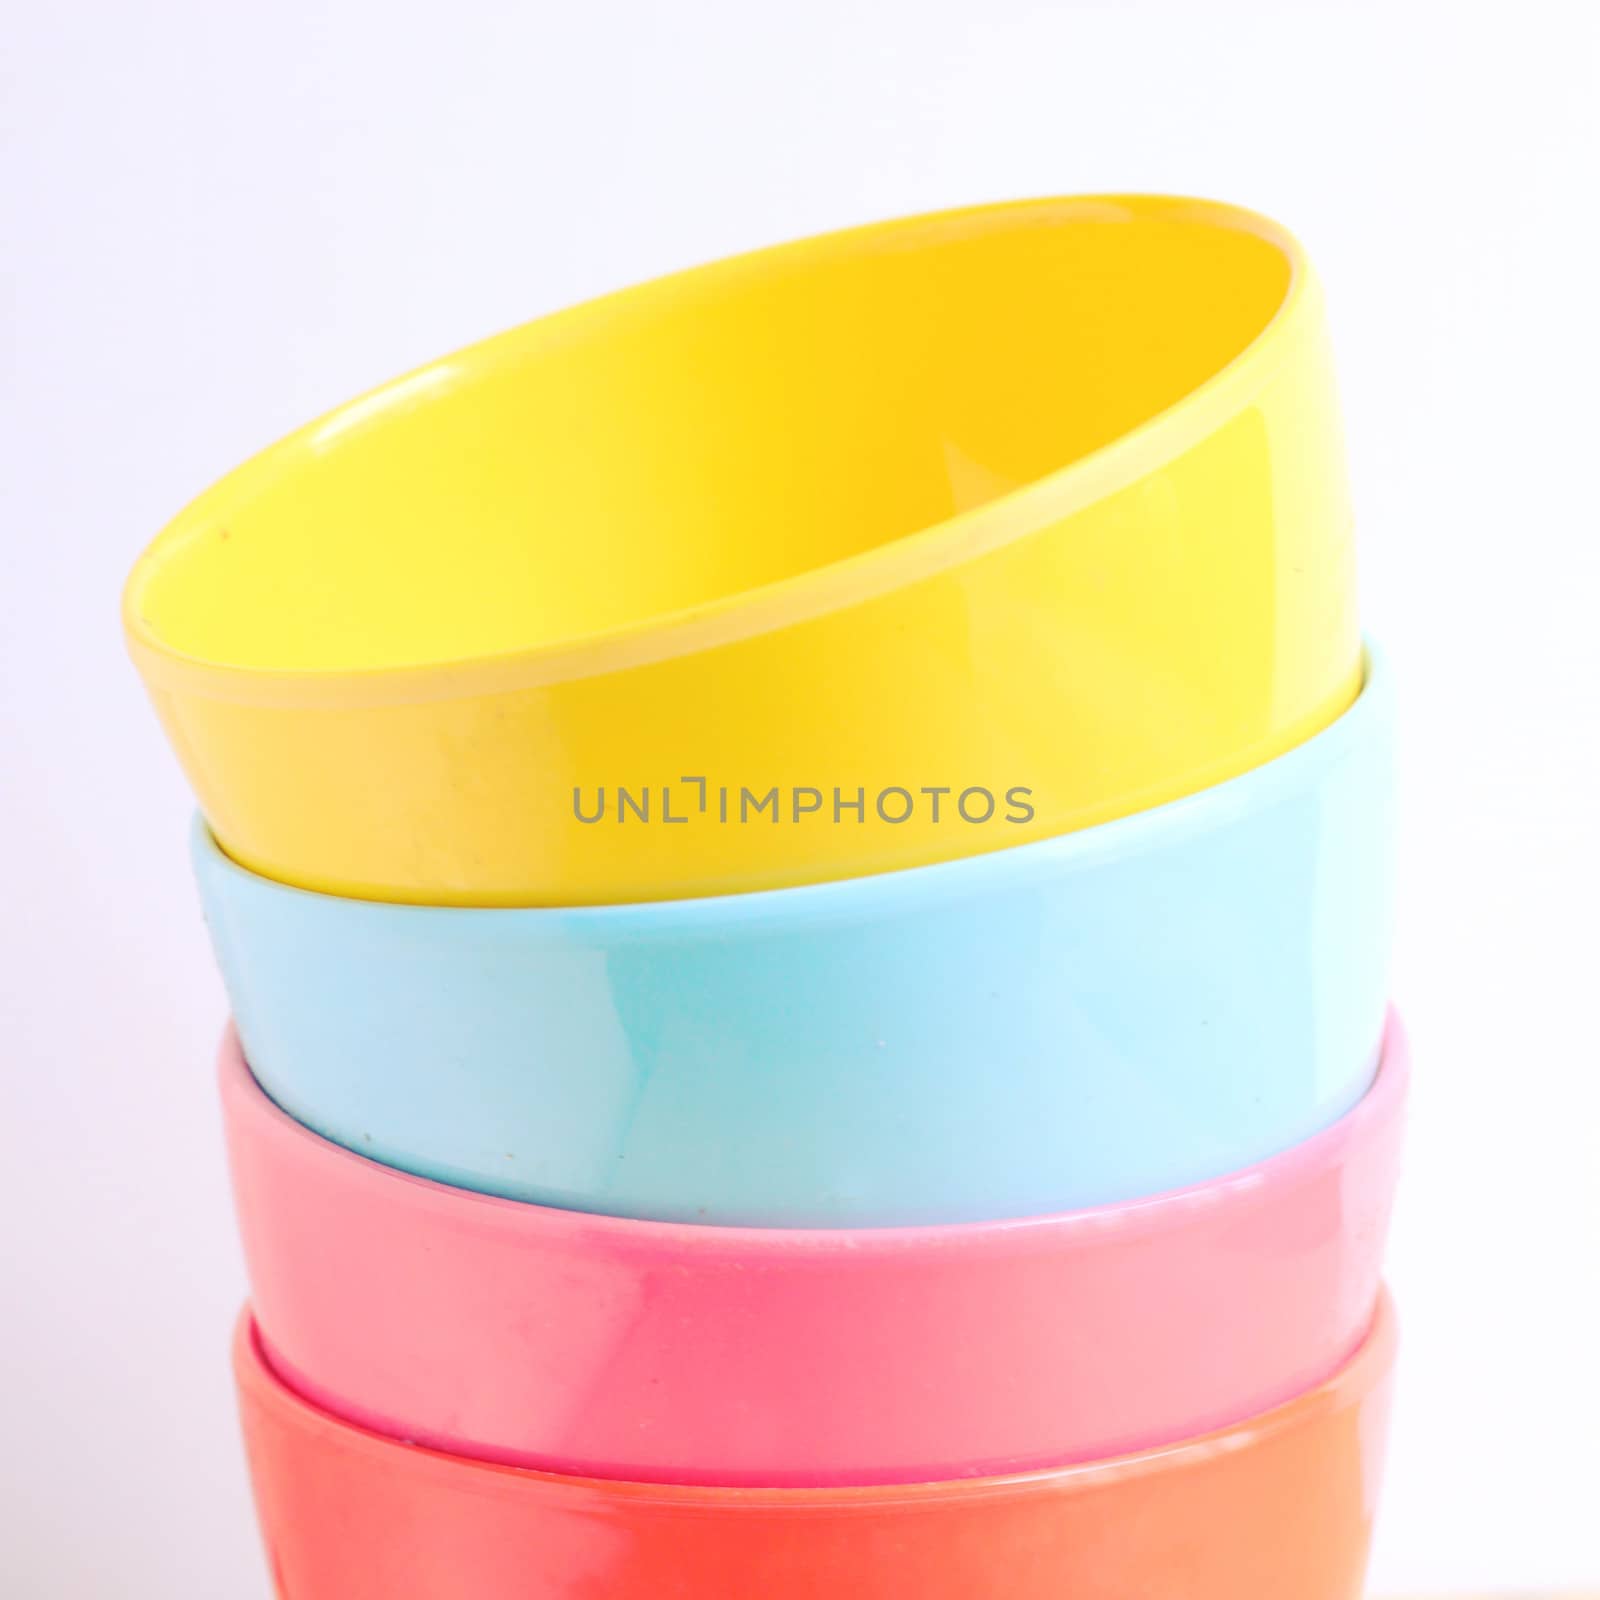 Stack of colorful plastic bowl with retro filter effect by nuchylee